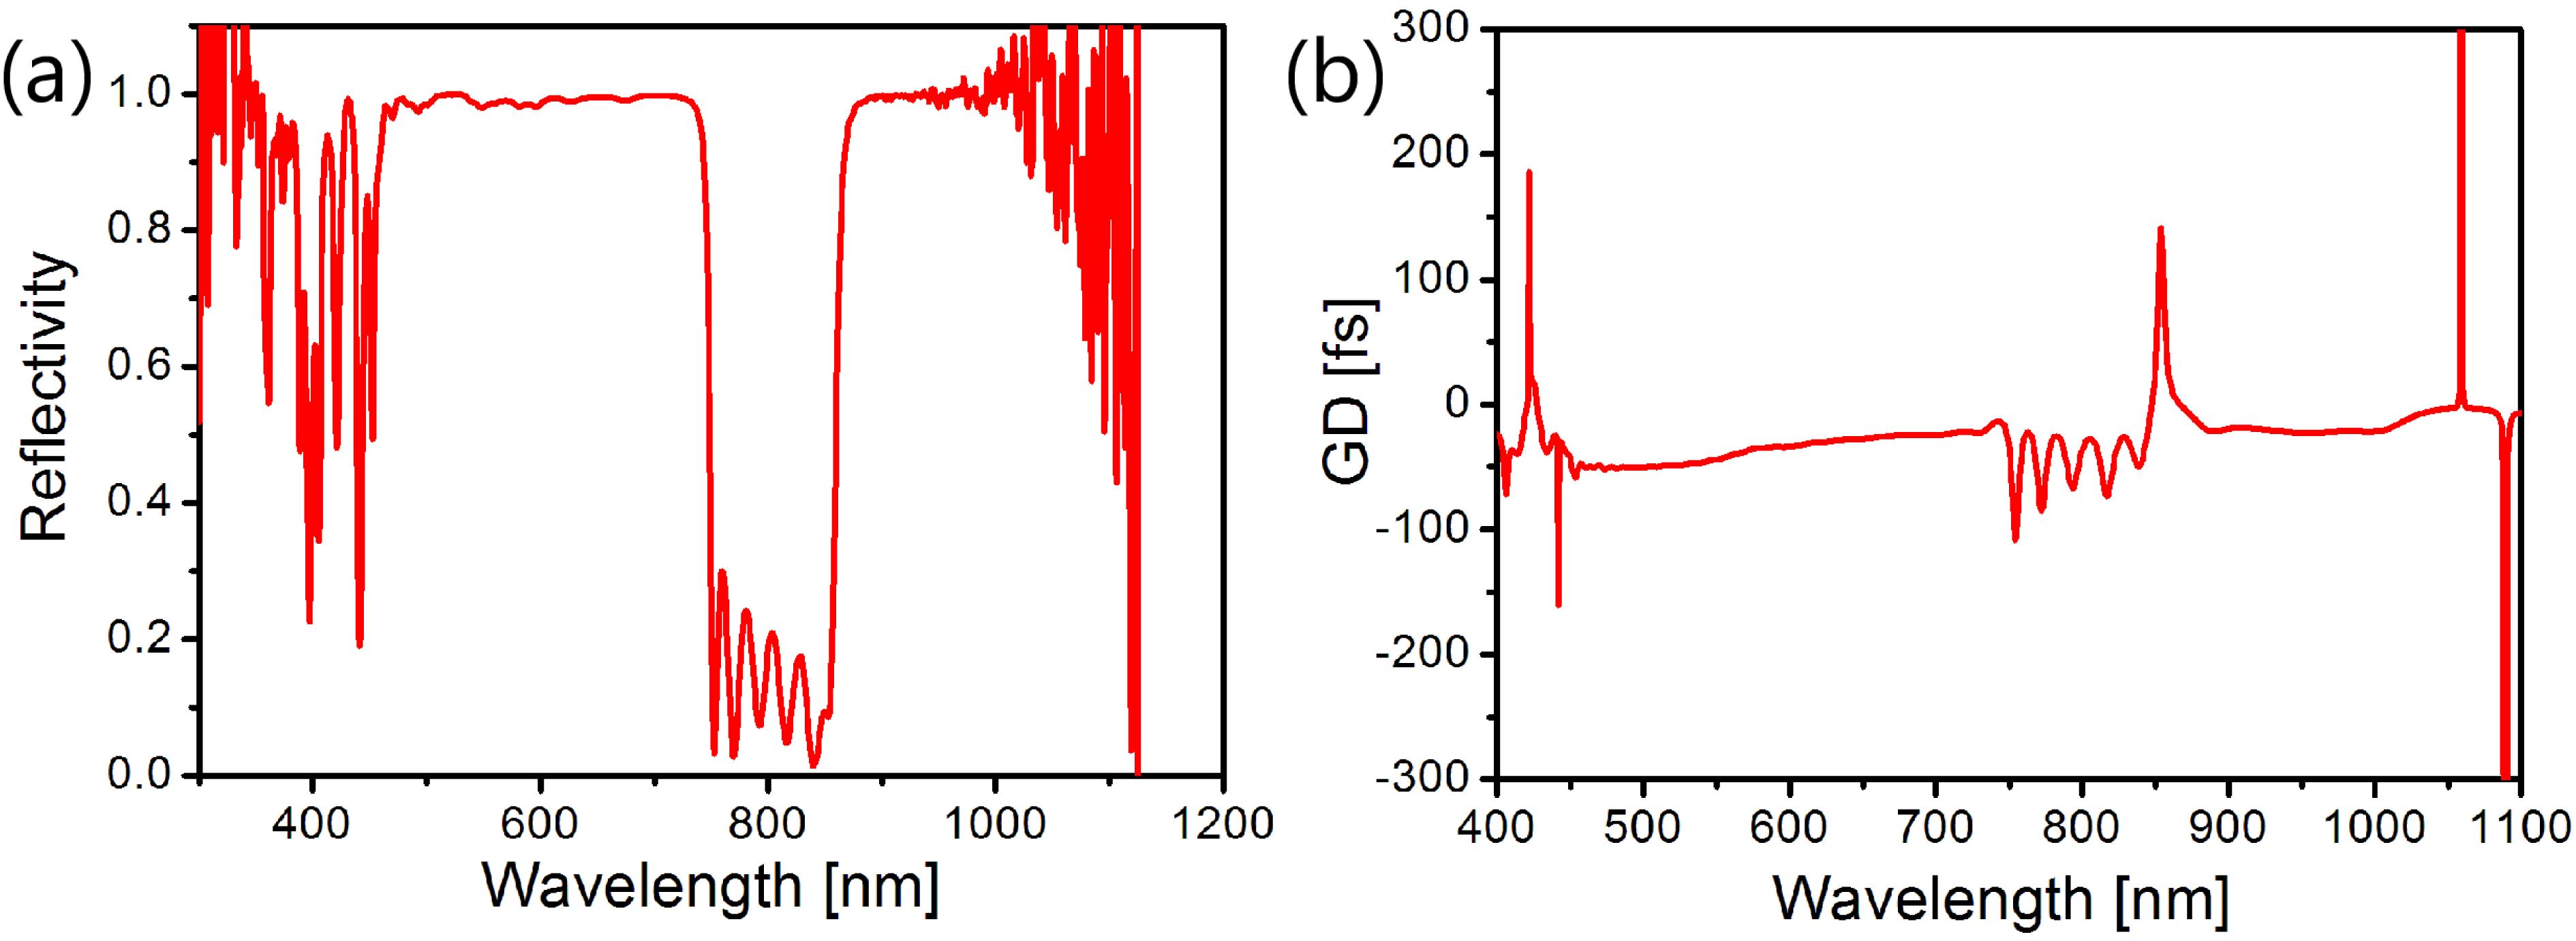 (a) Measured reflectivity and (b) group delay of the band-stop mirror.